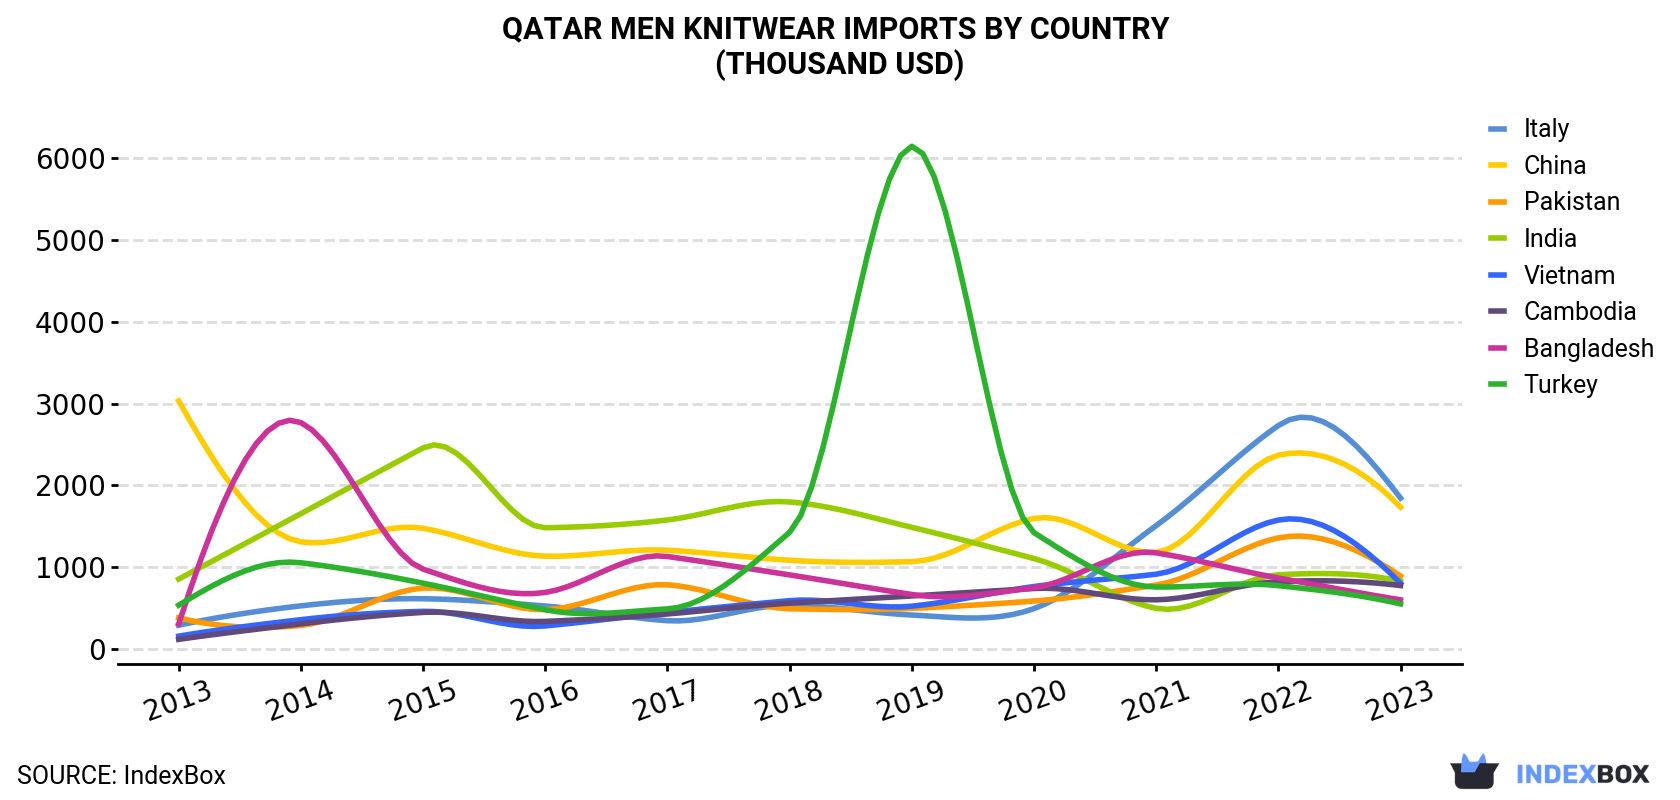 Qatar Men Knitwear Imports By Country (Thousand USD)